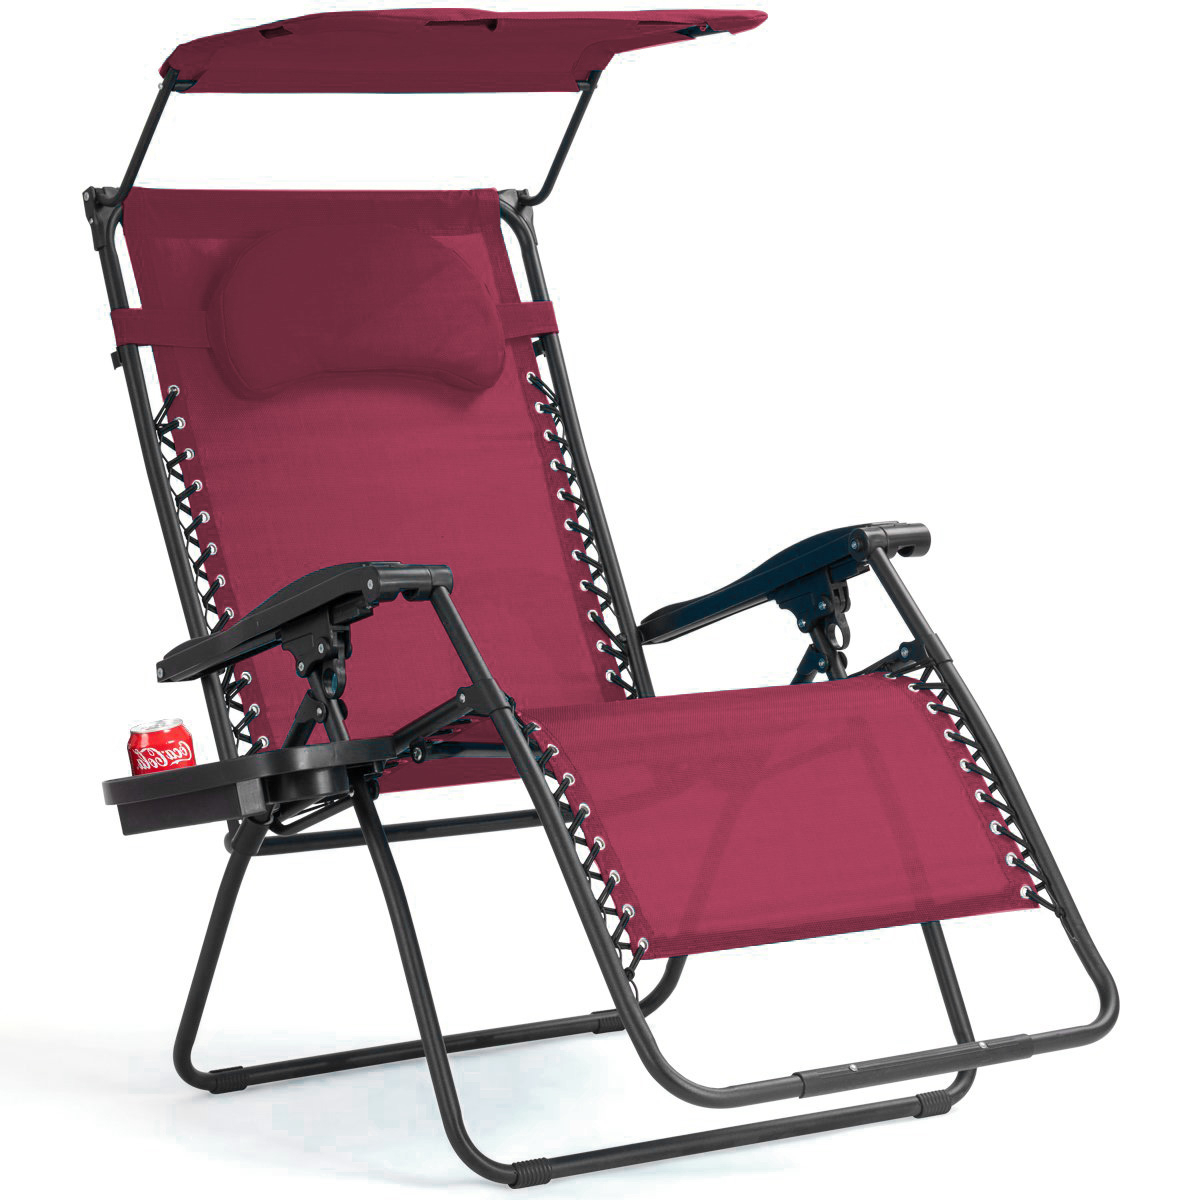 Folding Recliner Zero Gravity Lounge Chair W/ Shade Canopy Cup Holder Wine